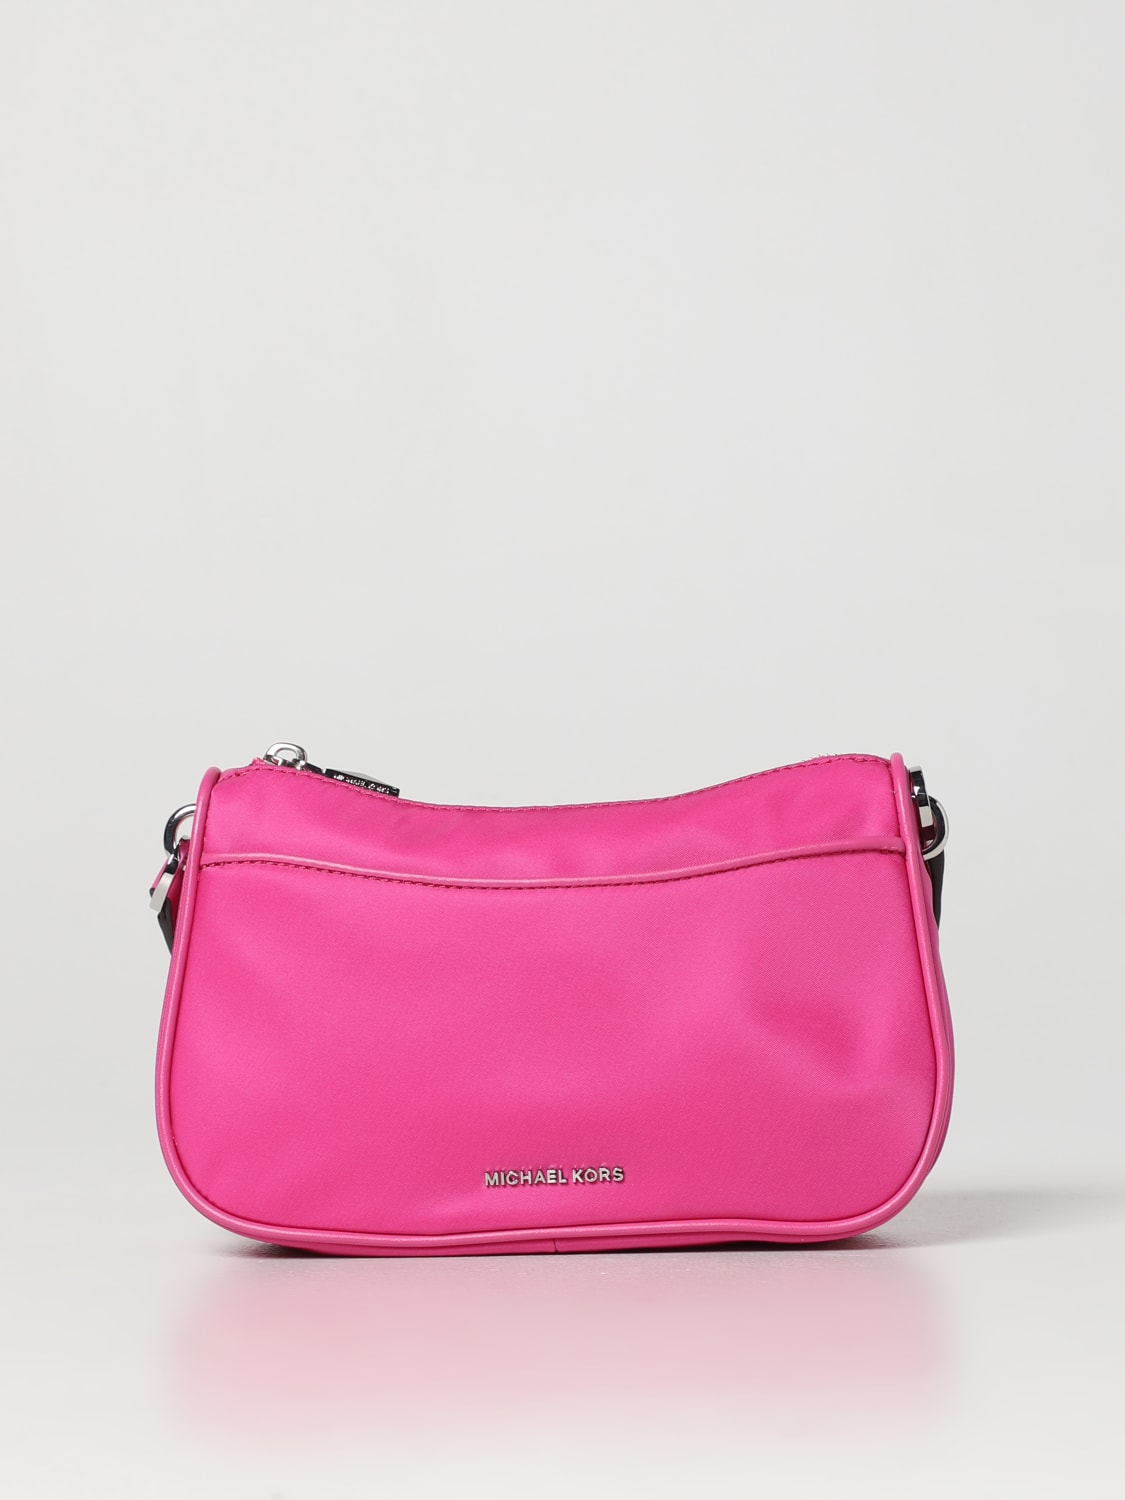 Bags and Accessories on Sale at Michael Kors Outlet Online 